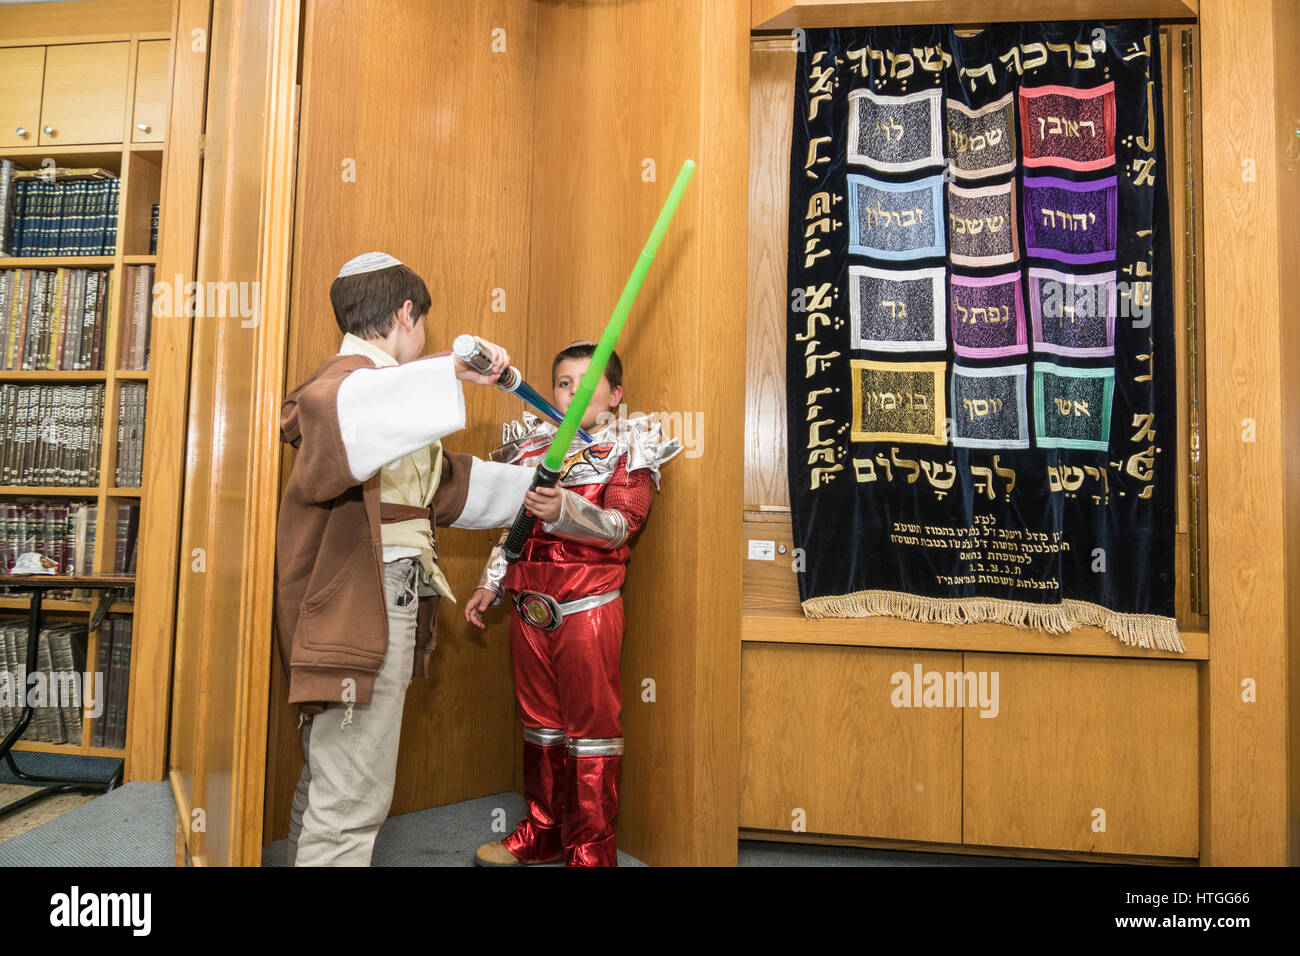 Elkana, Israel. 11th Mar, 2017. Purim holiday celebrations, Elkana, Israel. People in costumes celebrate the Jewish holiday of Purim. In this holiday Jews traditionaly dress in costumes, read the scroll of Esther, a story about an anti-jewish failed plot in ancient Persia, and make a racket whenever the name of Haman, the main antagonist, is mentioned. Credit: Yagil Henkin/Alamy Live News Stock Photo